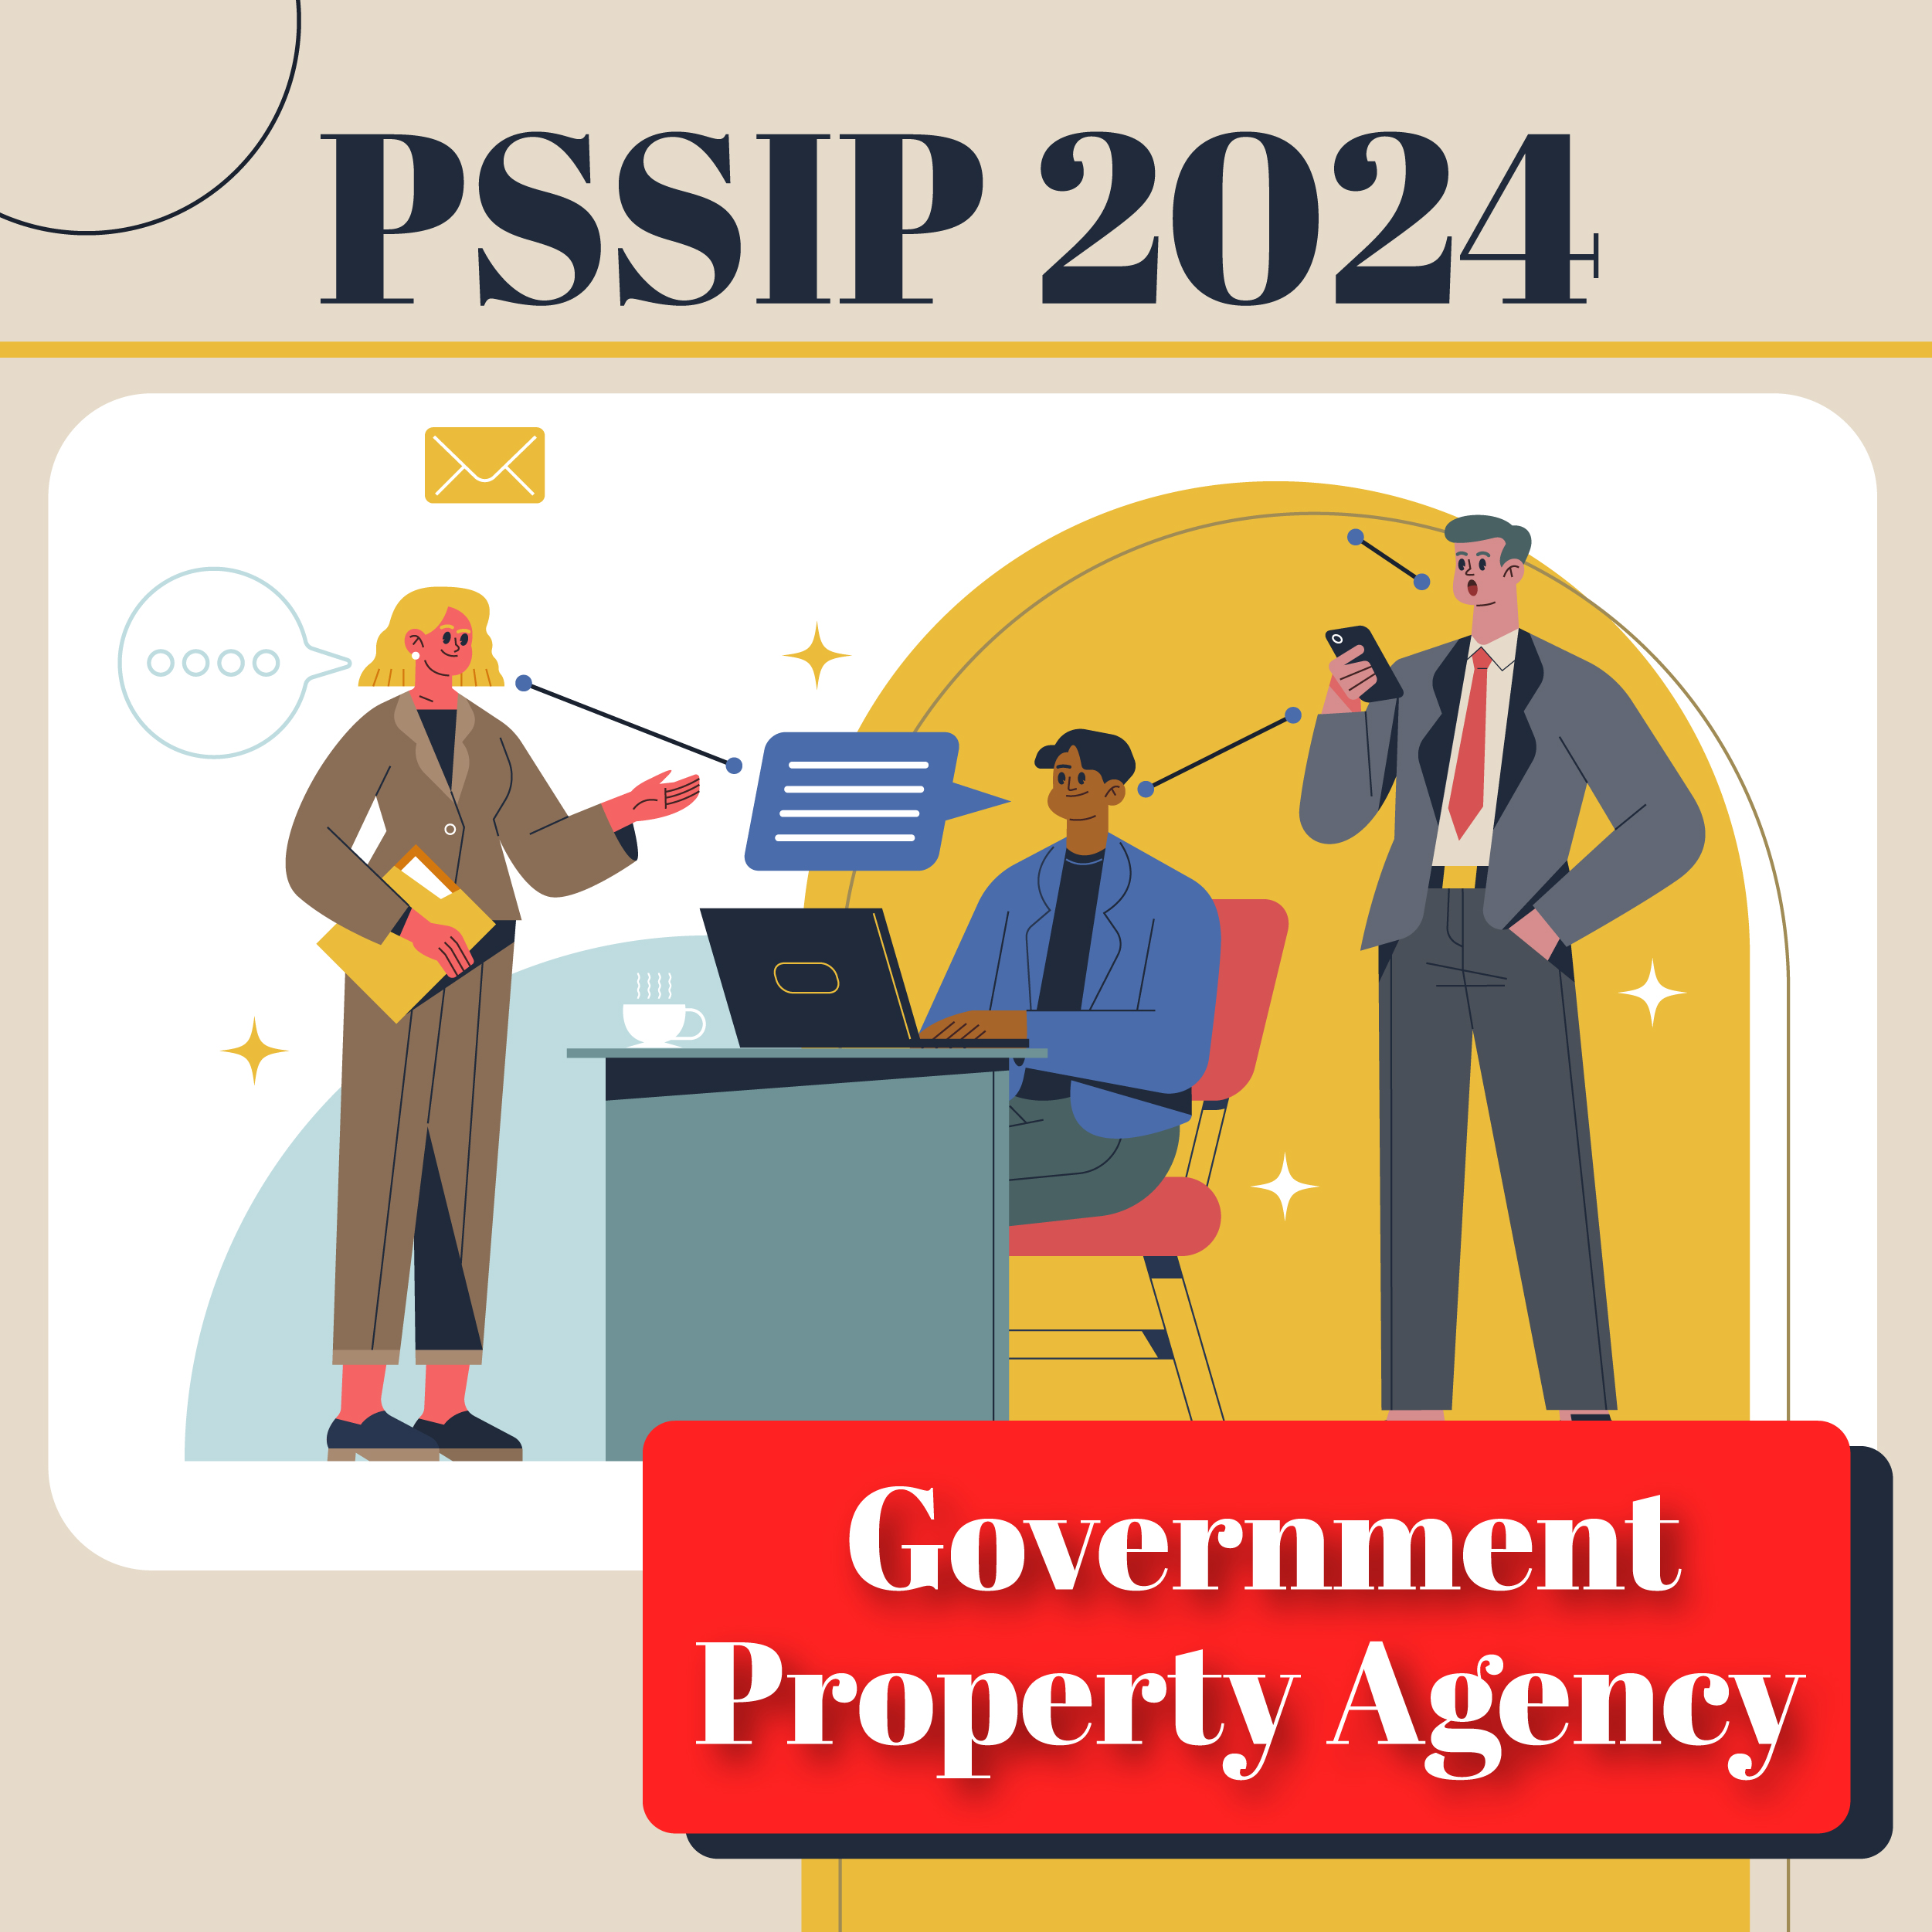 PSSIP2024 – Government Property Agency